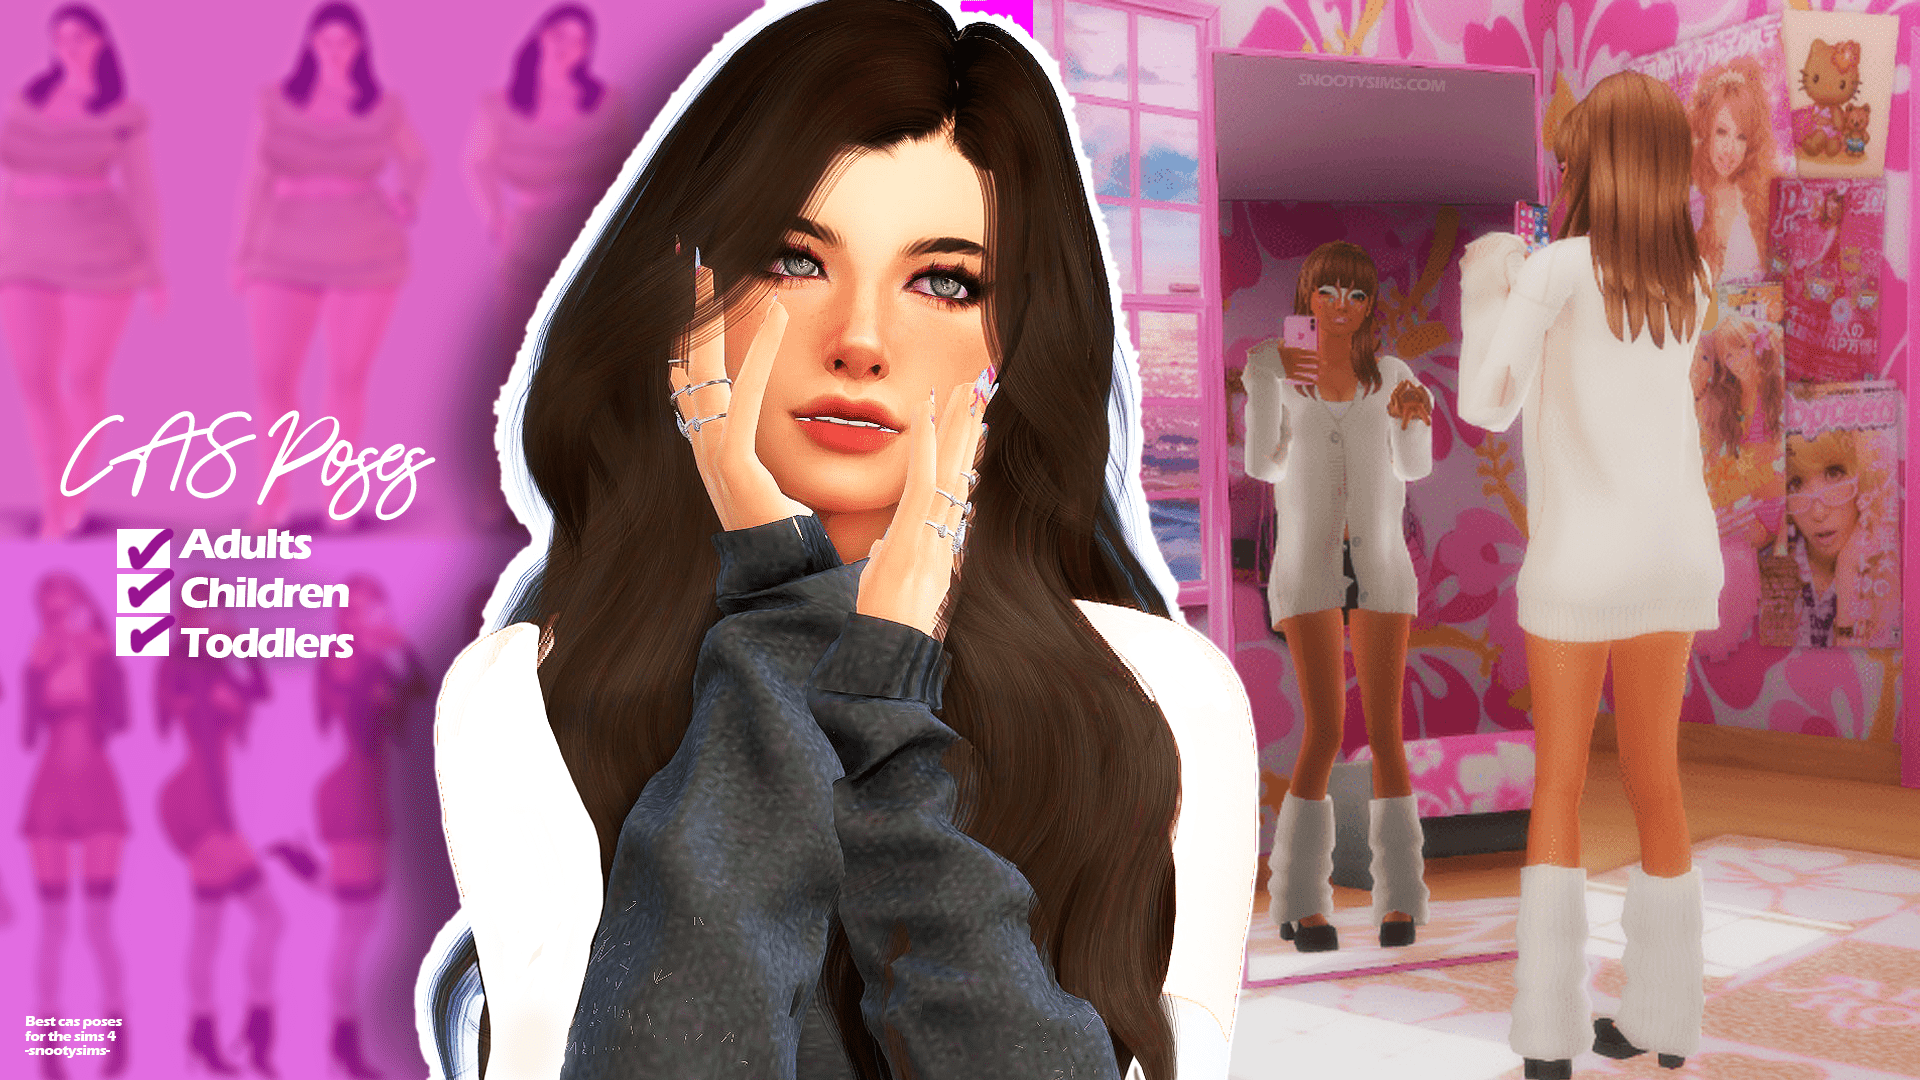 POSE DUMP #18 | Sims 4, Sims 4 couple poses, Sims 4 characters